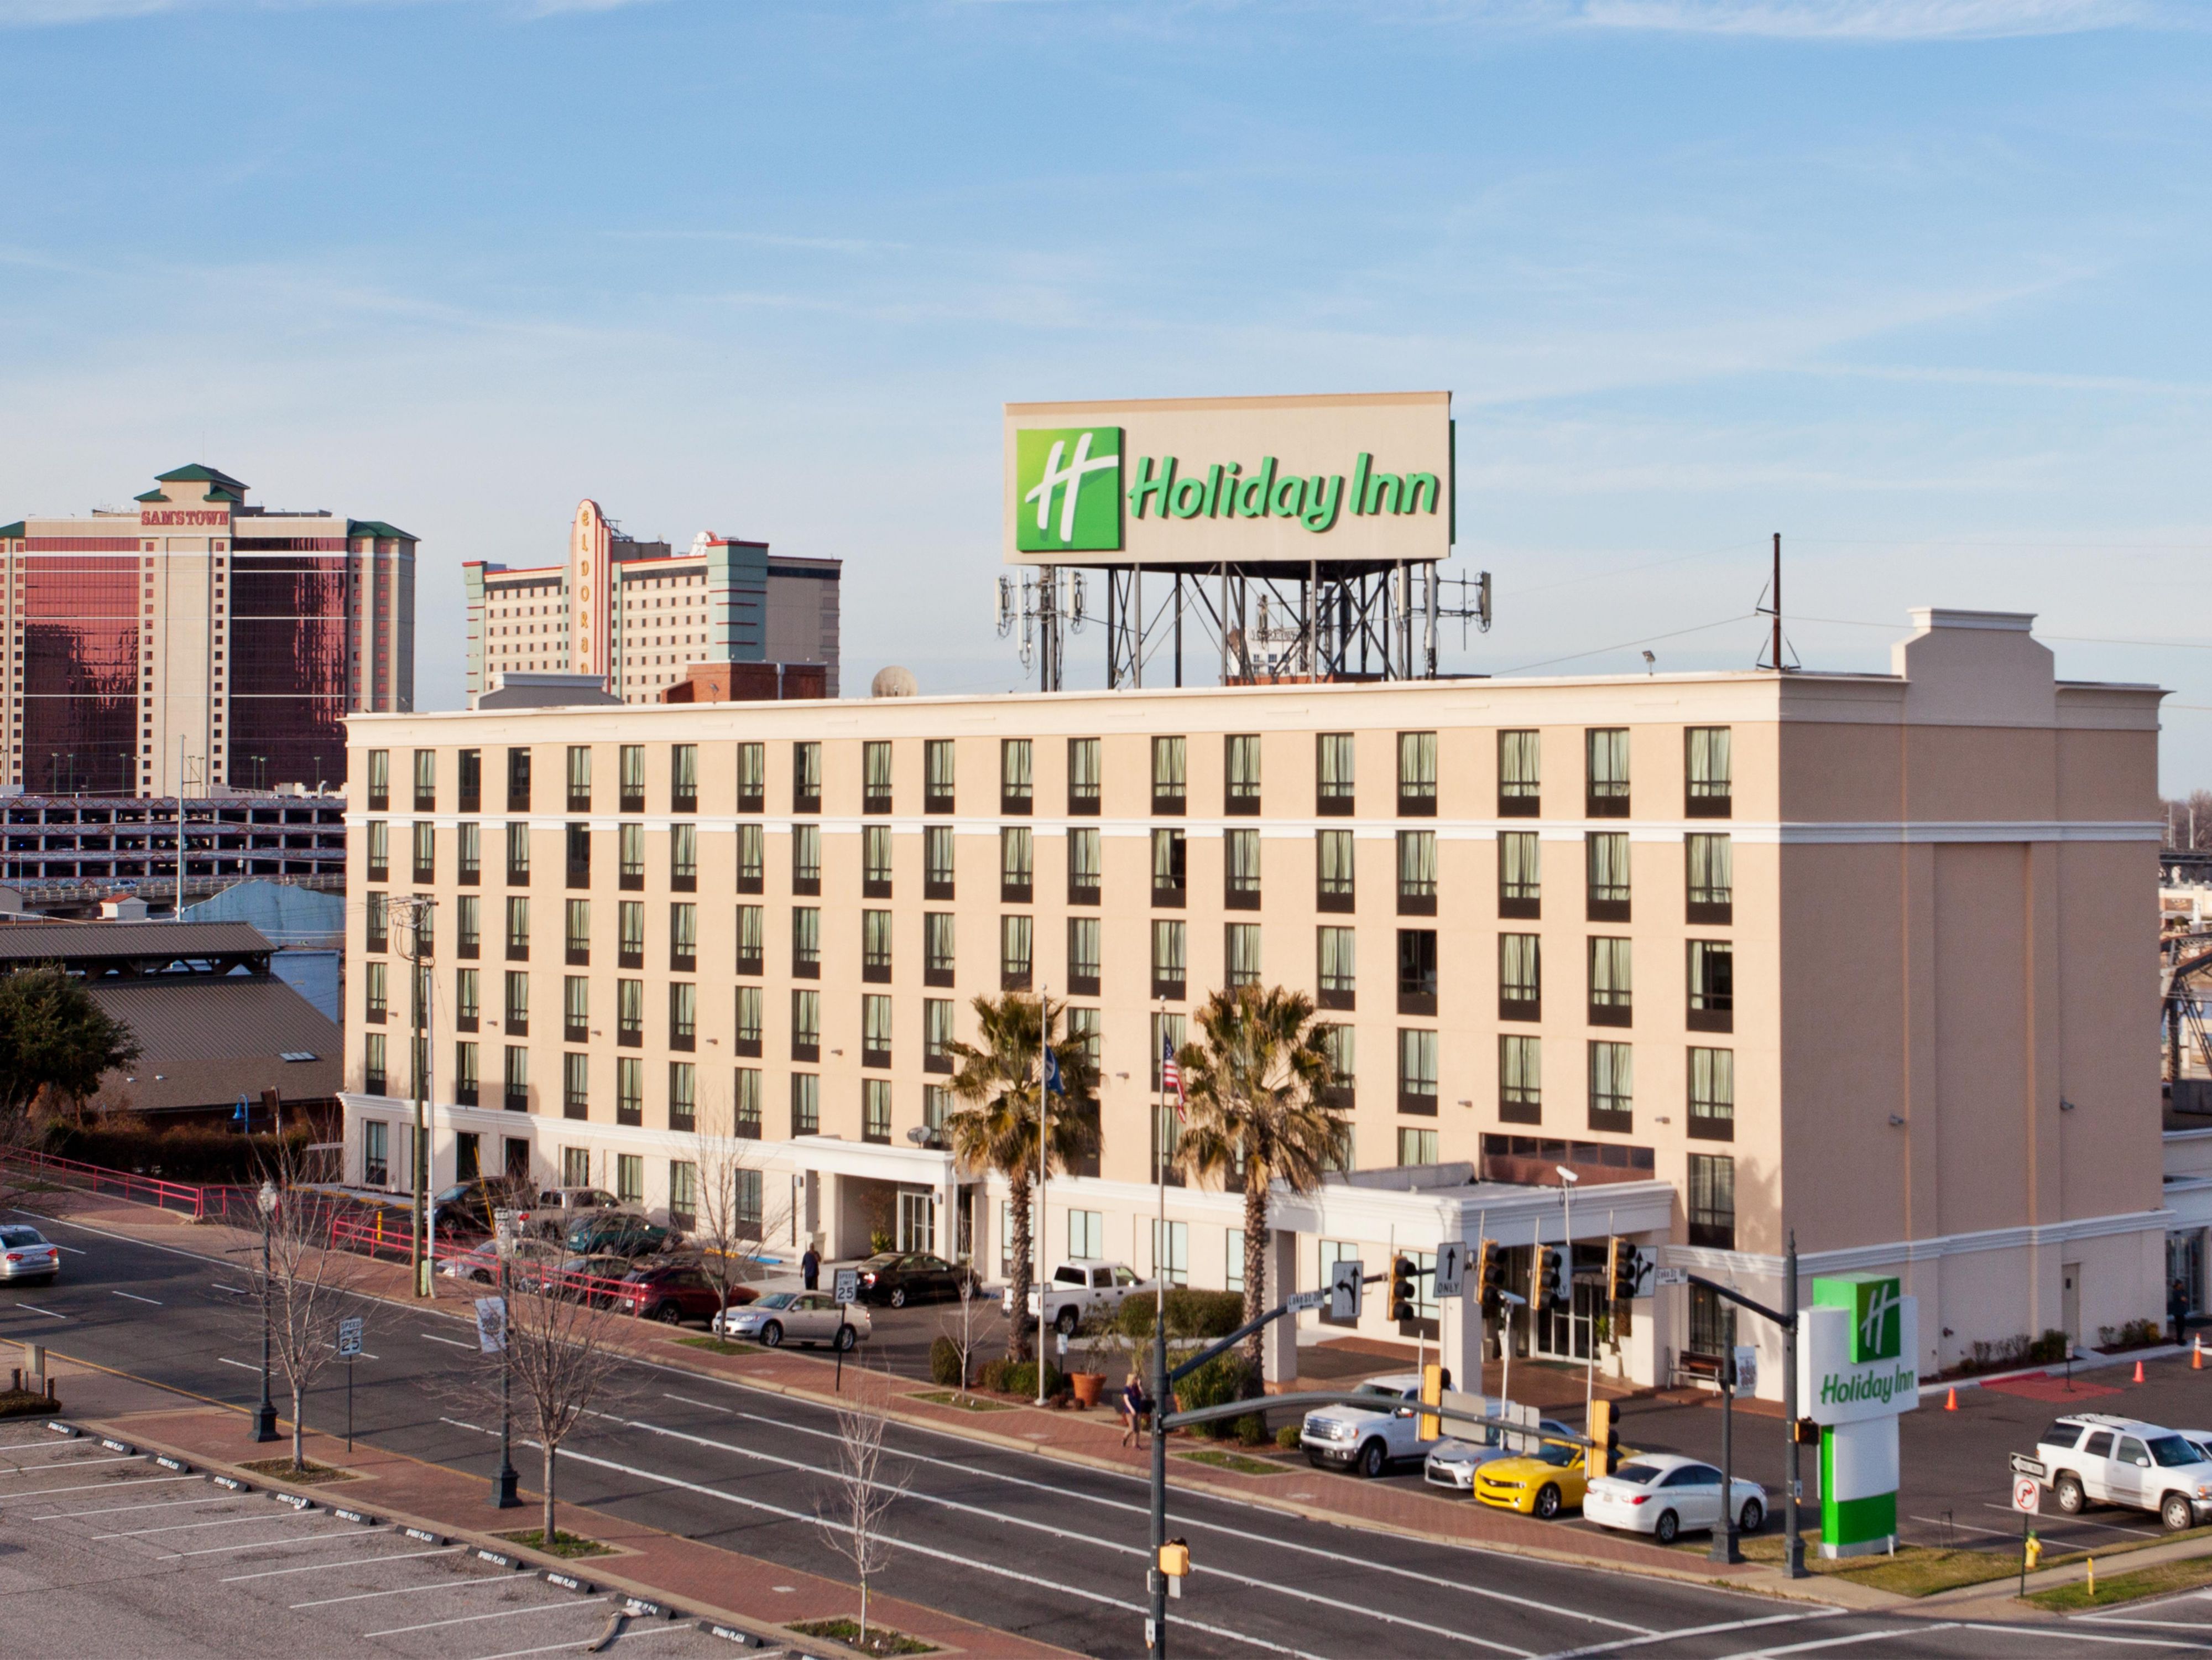 Located conveniently in the downtown district, the hotel provides fast and easy commute to the local casinos, attractions, shopping, and professional businesses. With restaurant and lounge, and courtesy shuttle on site, we are prepared for your any need.